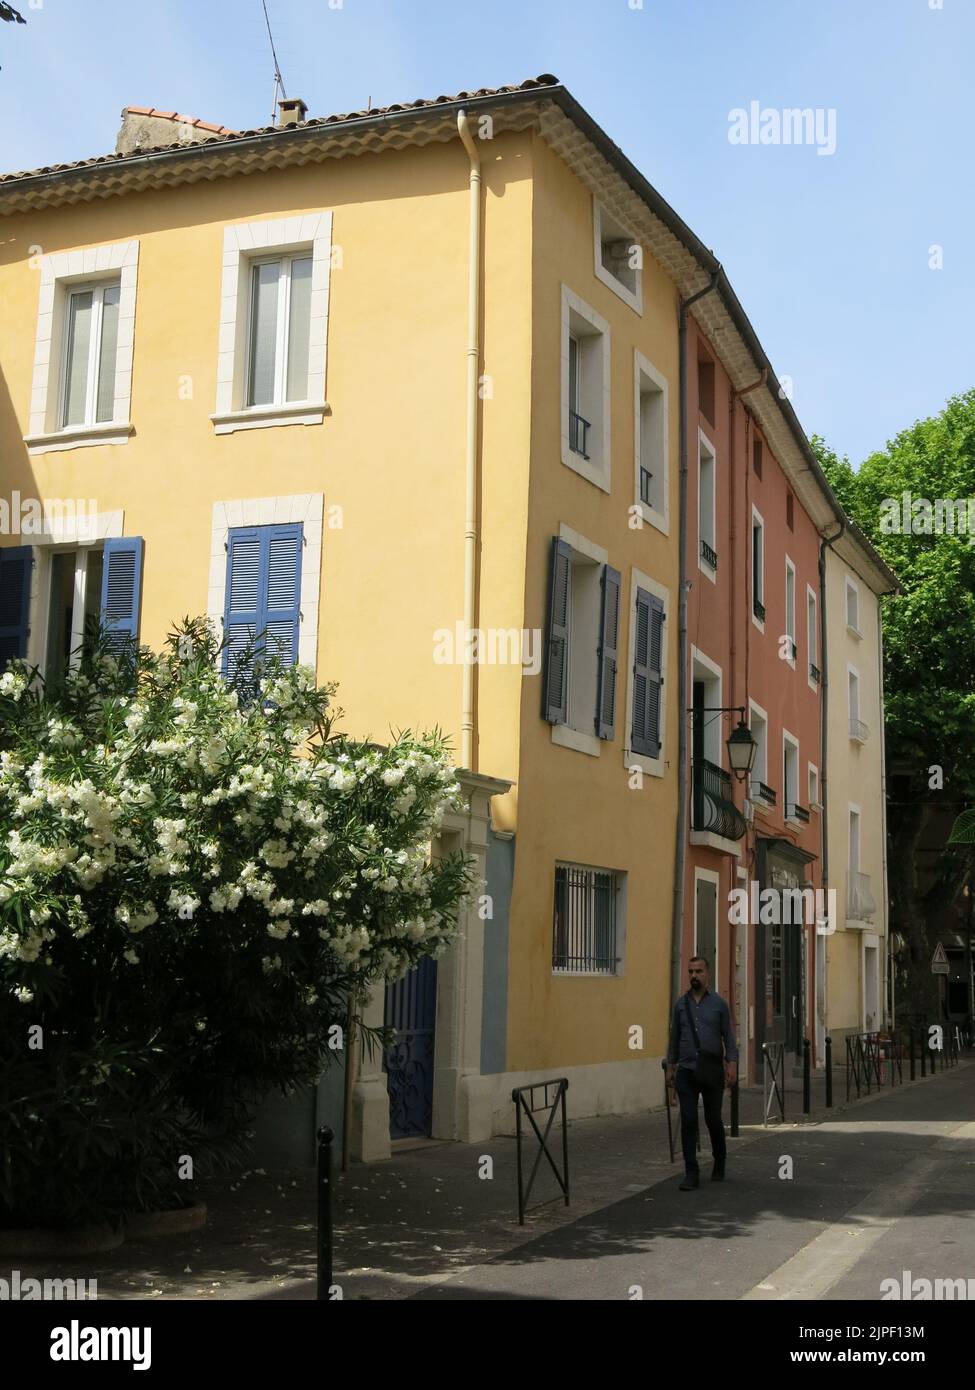 Brightly coloured buildings and tall town houses in the French historic city of Orange. Stock Photo